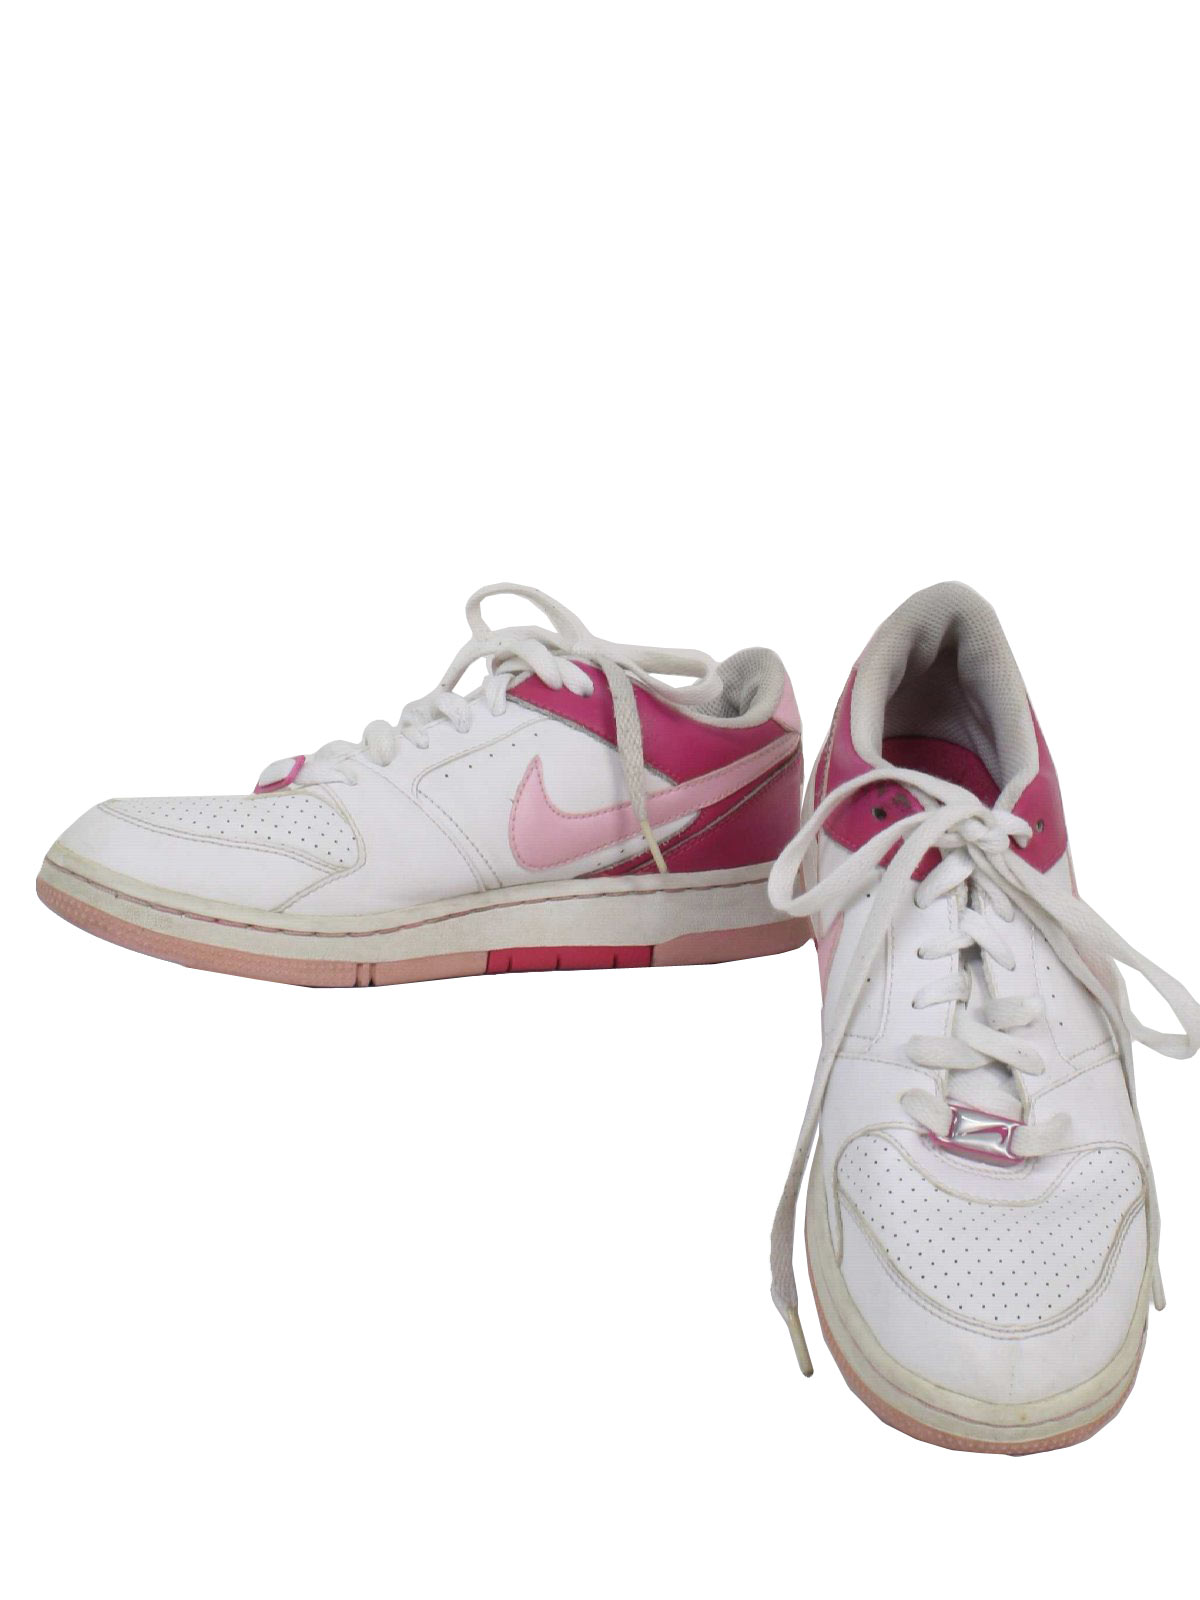 Anfibio Sin valor Procesando 1990's Vintage Nike Shoes: 90s -Nike- Womens off white and shaded pink  classic swoosh design nike tennis shoes with flat bottom and off white  embroidered -Nike- at ankle. Shoes show wear but